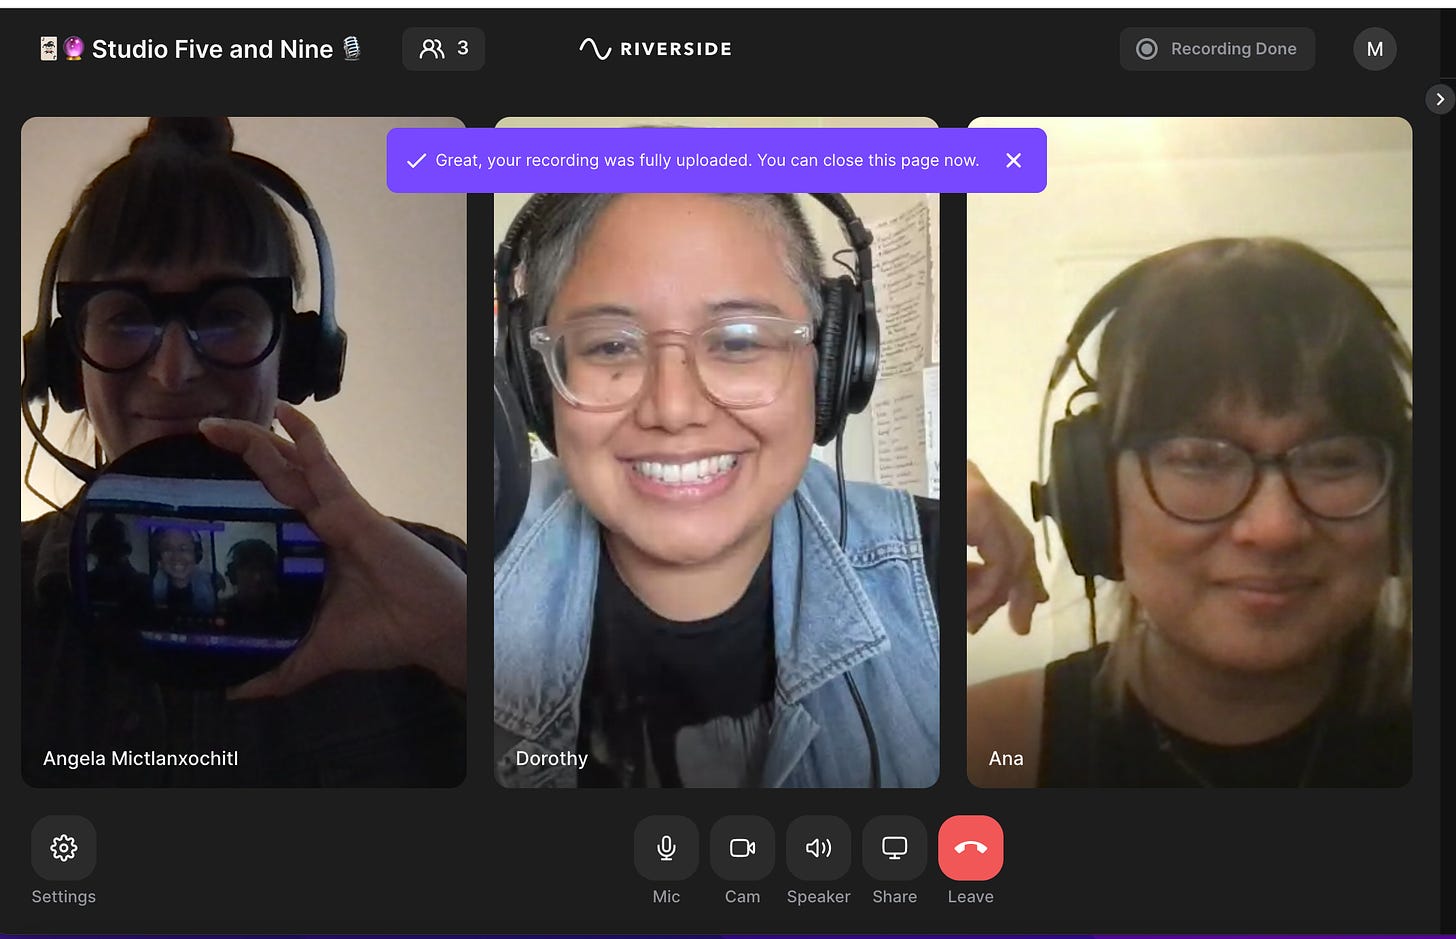 Image description: A screenshot (from left to right) of guest, Angela, and co-hosts, Dorothy and Ana in rectangular boxes within our digital podcasting studio, Riverside, smiling for the camera. Angela is holding her obsidian mirror to the screen.